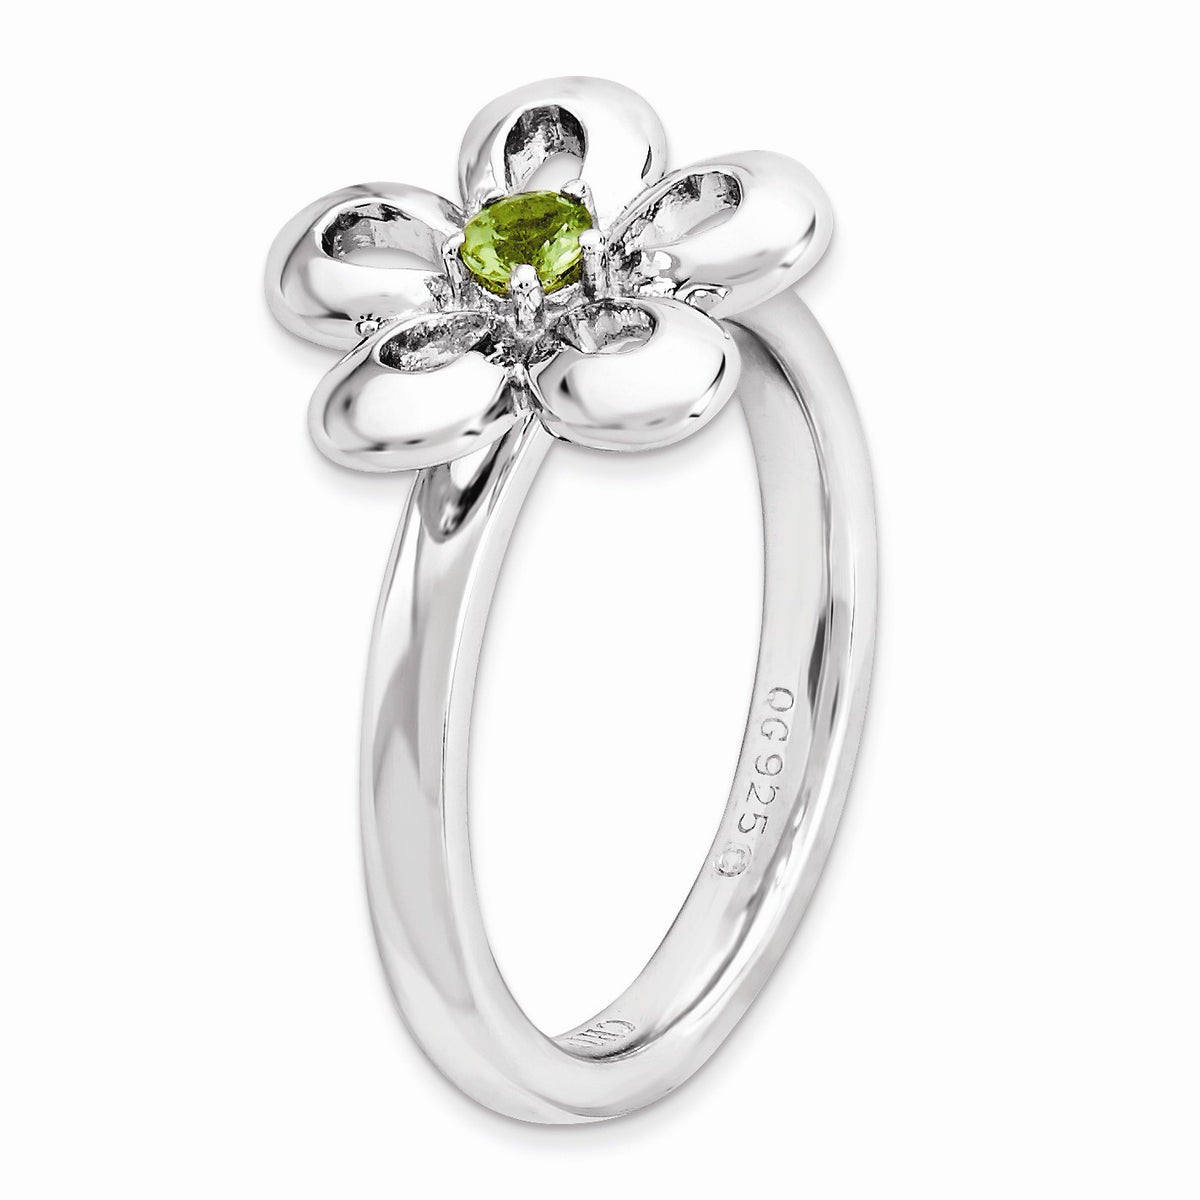 Alternate view of the Silver Stackable 13mm .12 Carat Peridot Flower Ring by The Black Bow Jewelry Co.